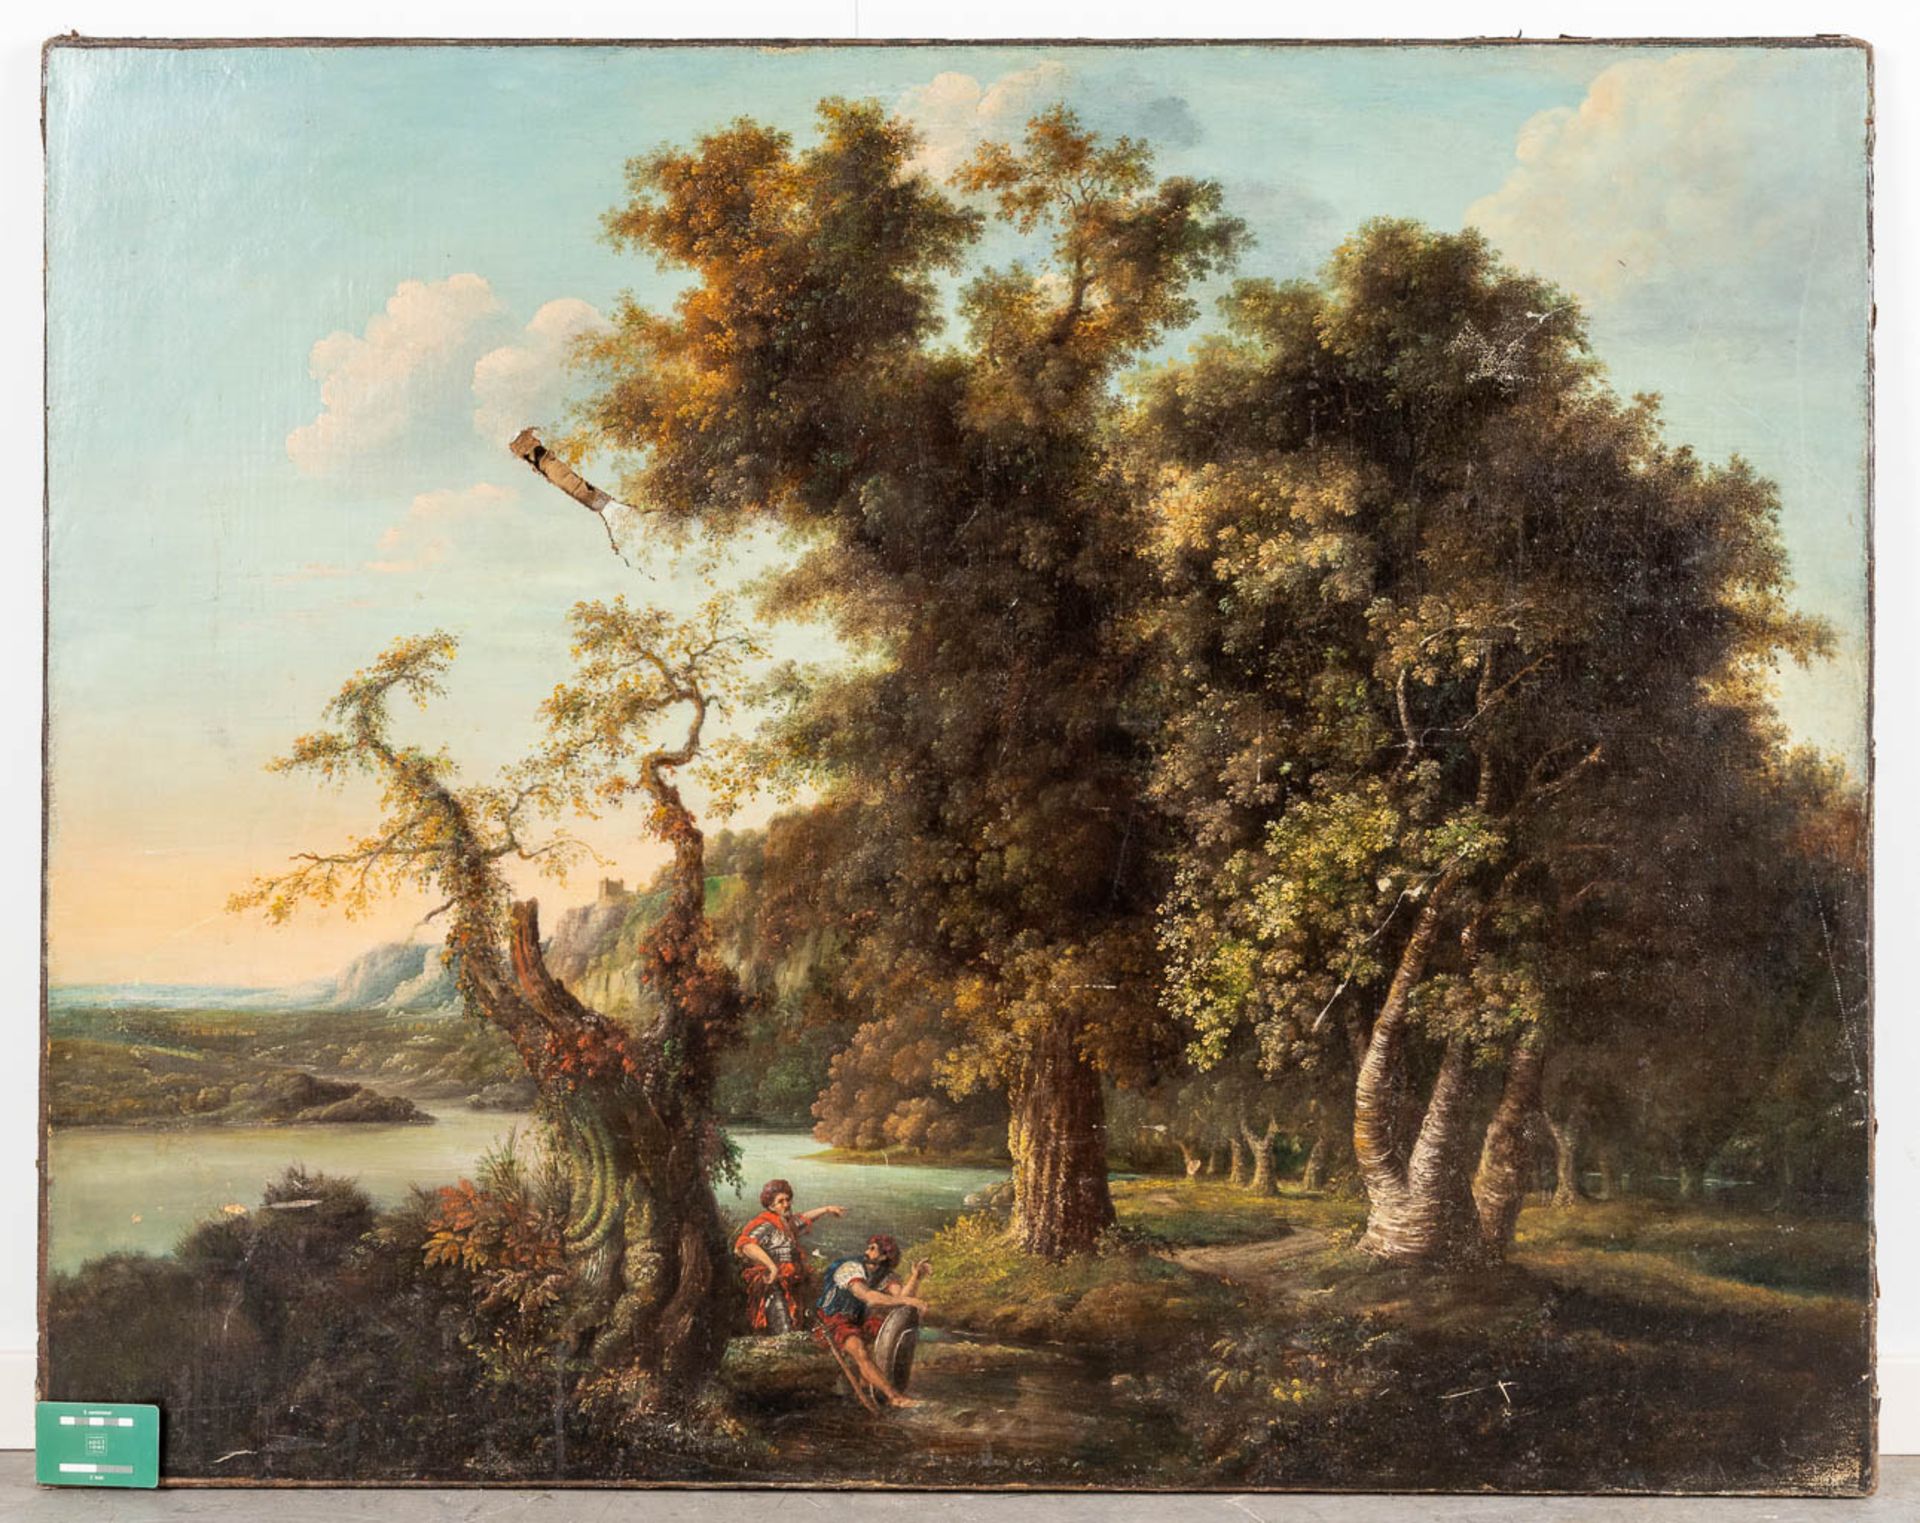 An antique painting, 'Landscape with figurines' oil on canvas. 17th century. (W: 124 x H: 98 cm) - Image 2 of 10